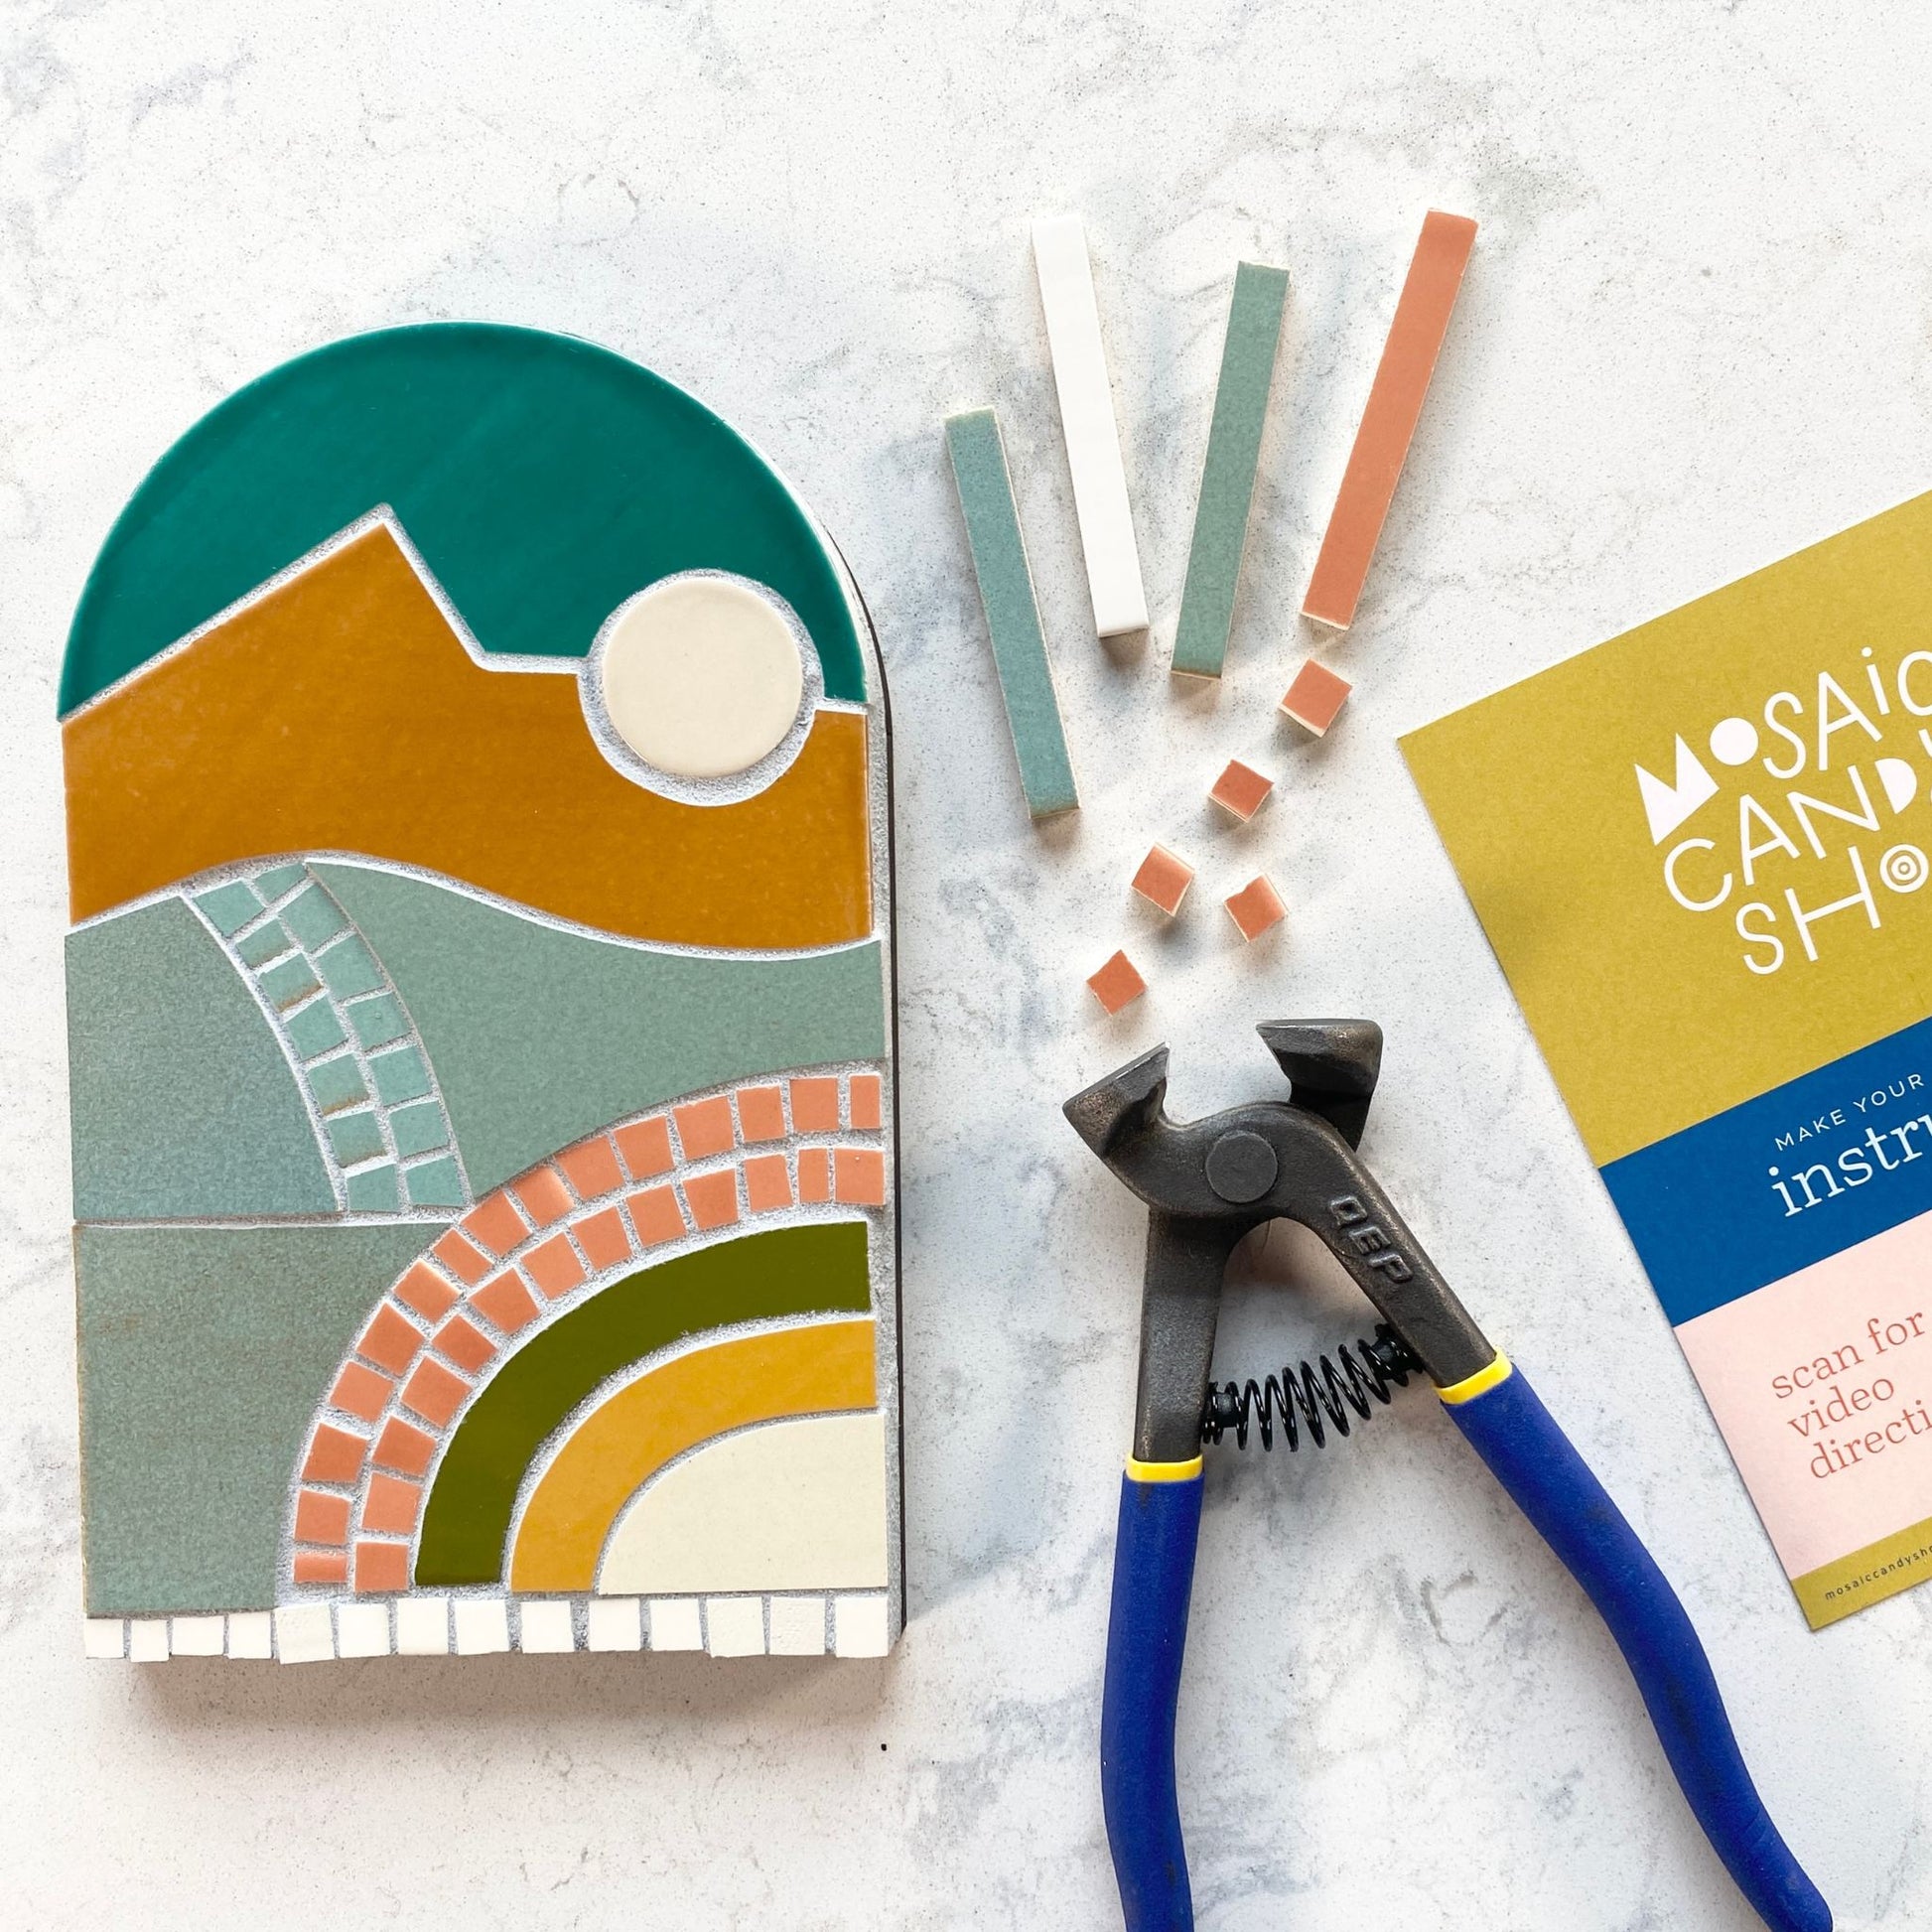 New Day Mosaic Kit in Sahara color way - assembled with tile nippers nearby